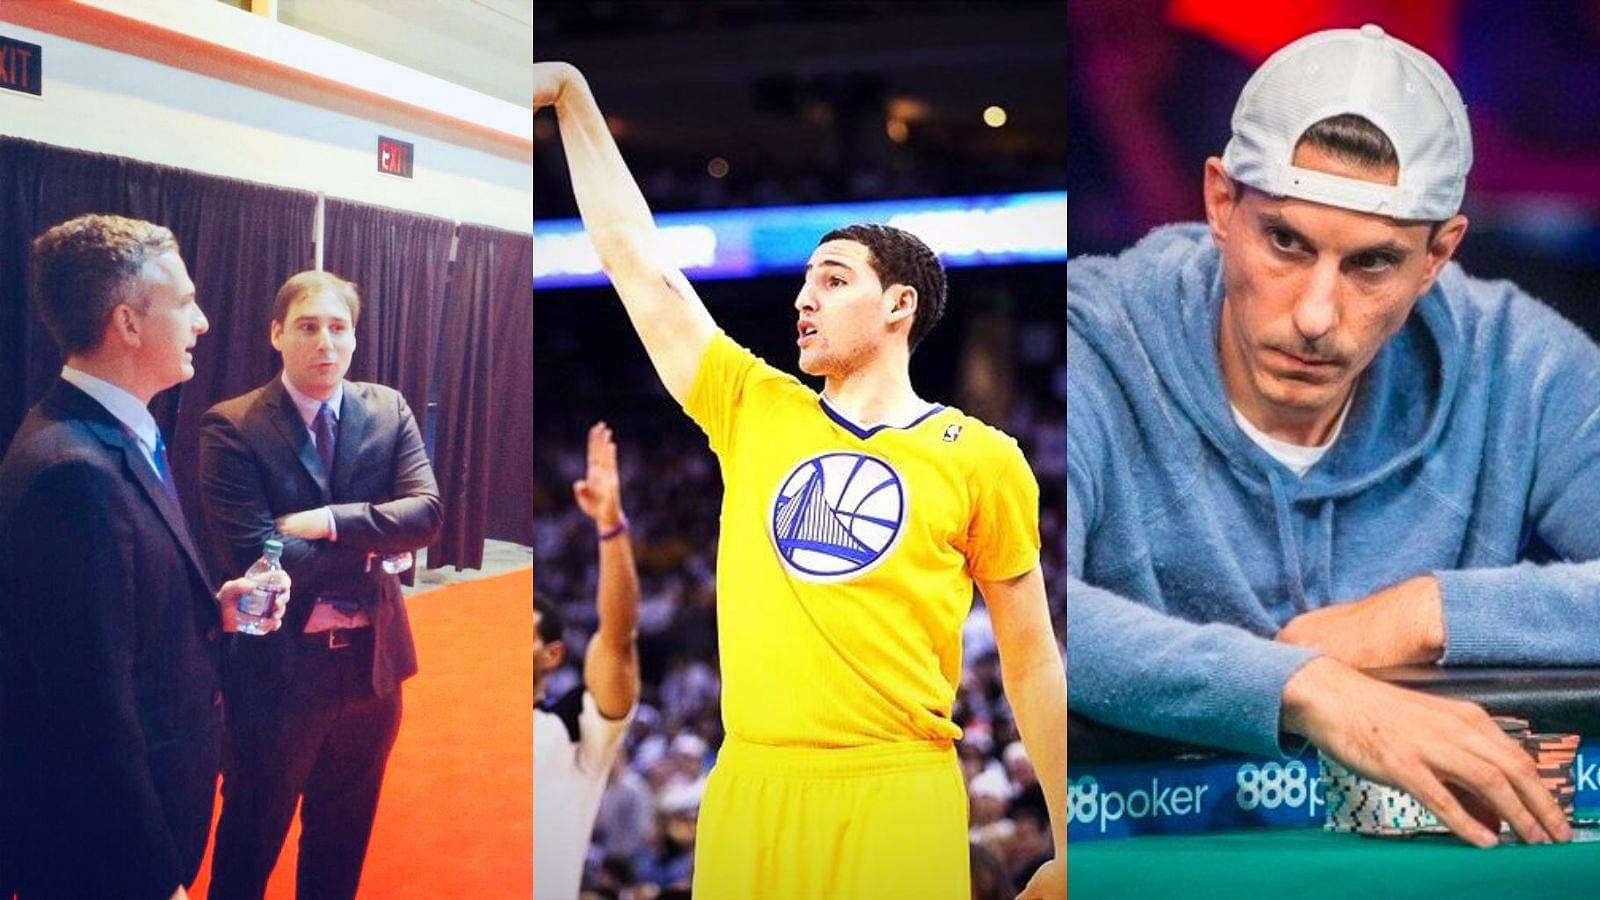 “Players like Klay Thompson come out of college every year .. get Kevin Love”: Bill Simmons, Zach Lowe, and NBA’s greatest bettor had it all wrong about Warriors guard